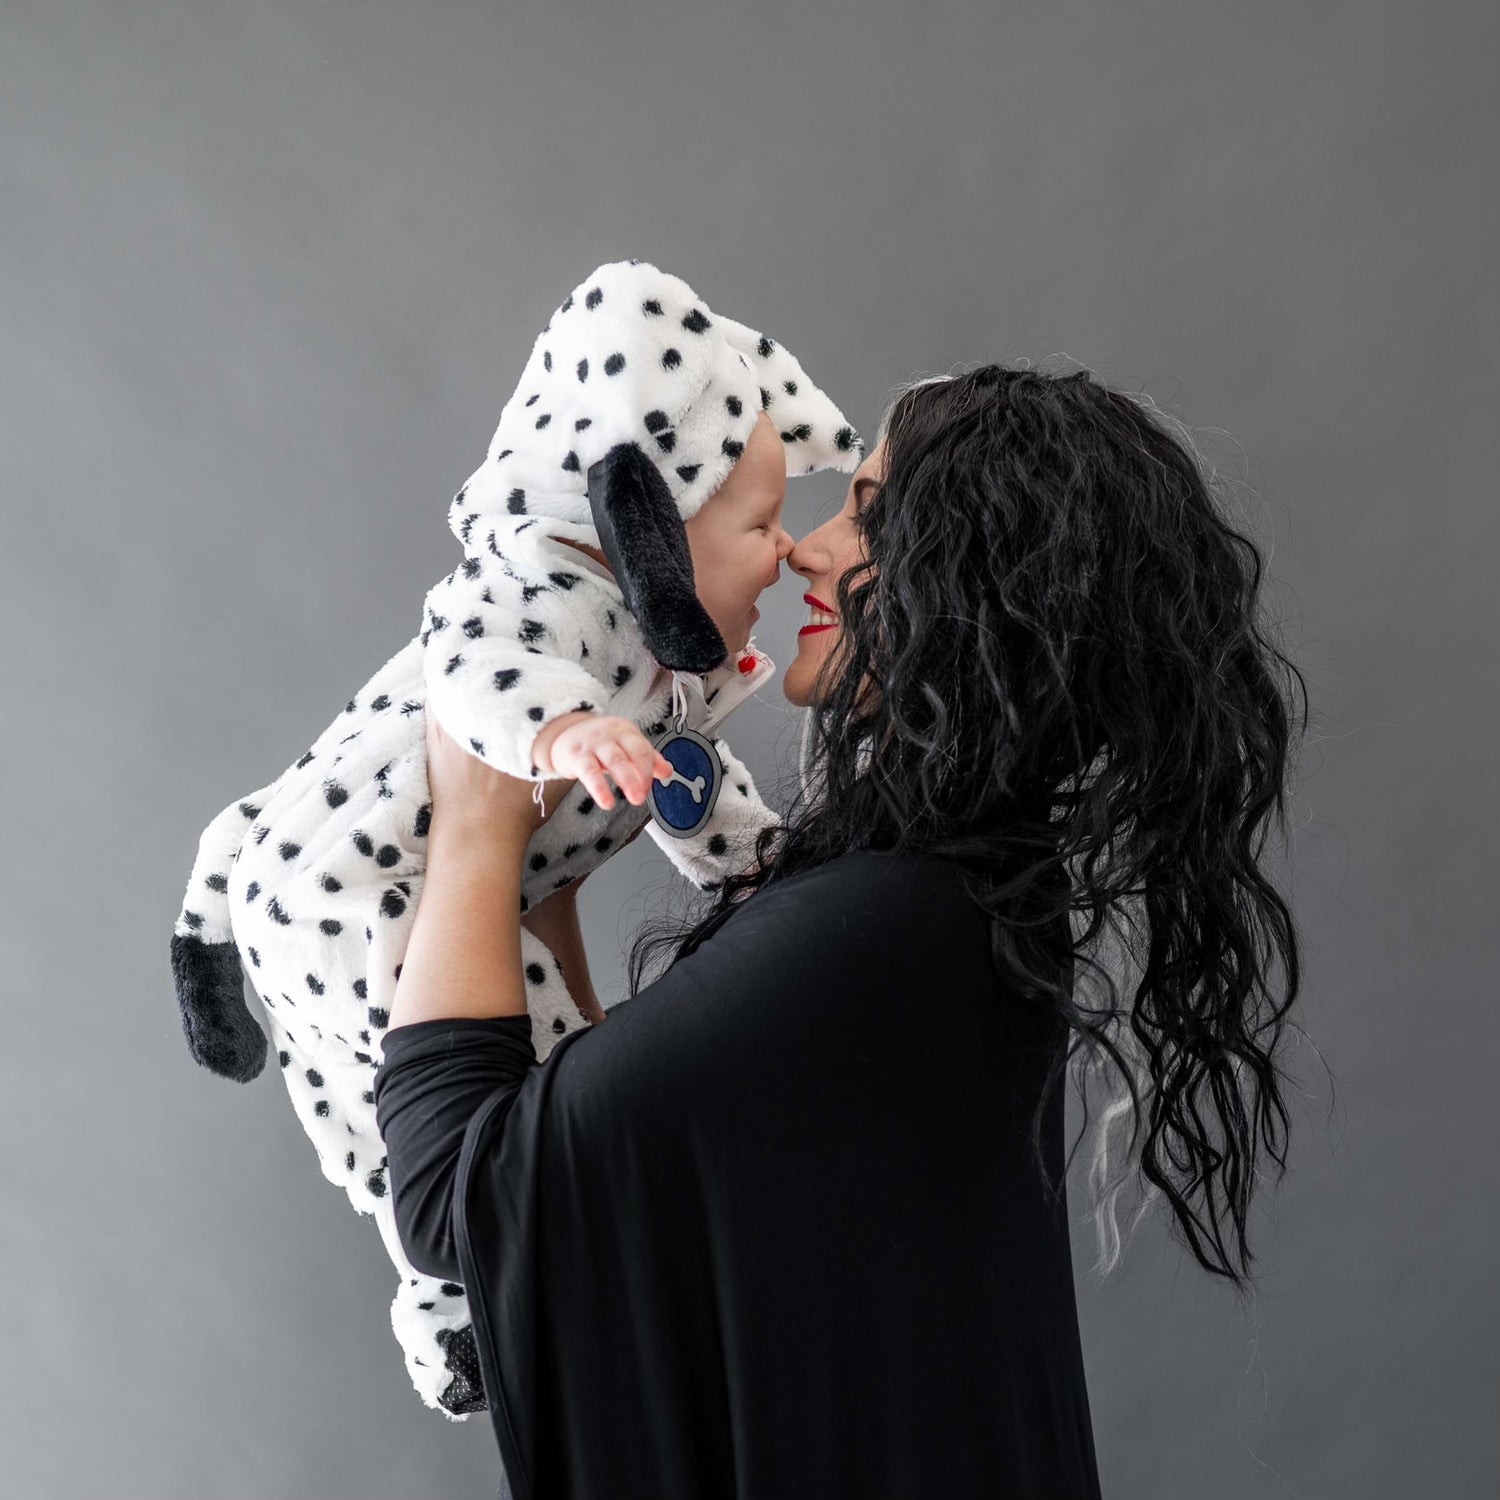 mom and baby dressed up as cruella deville and dalmation for halloween